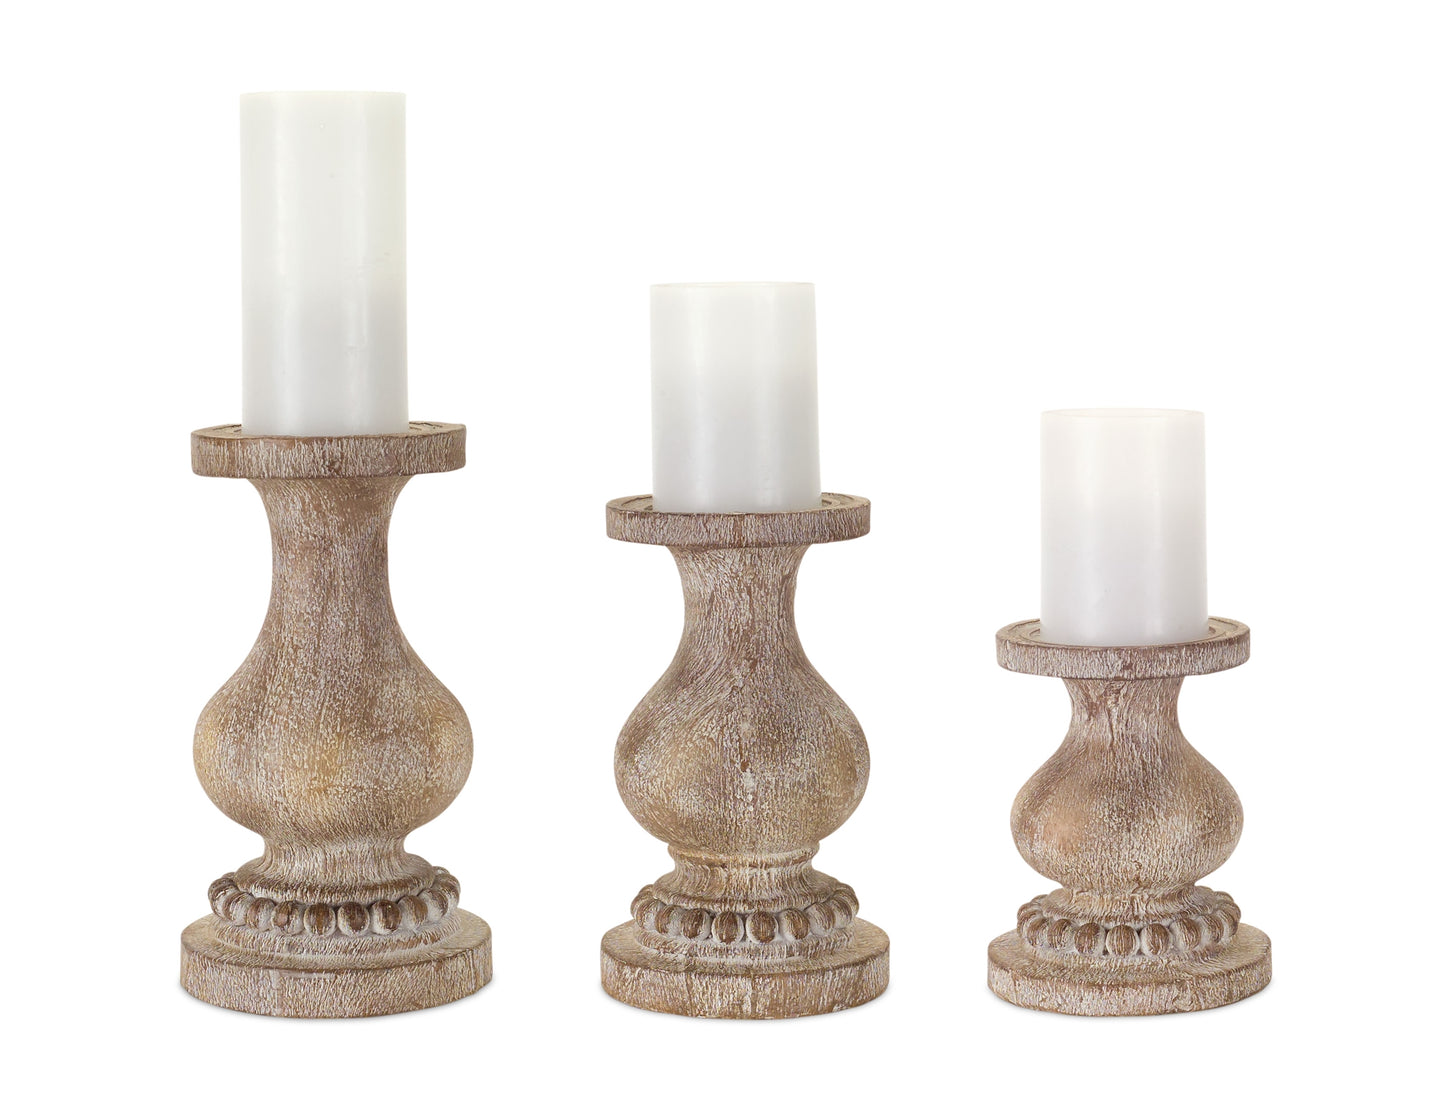 3 sizes of wooden pillar candle holders with beaded base and white pillars on them.